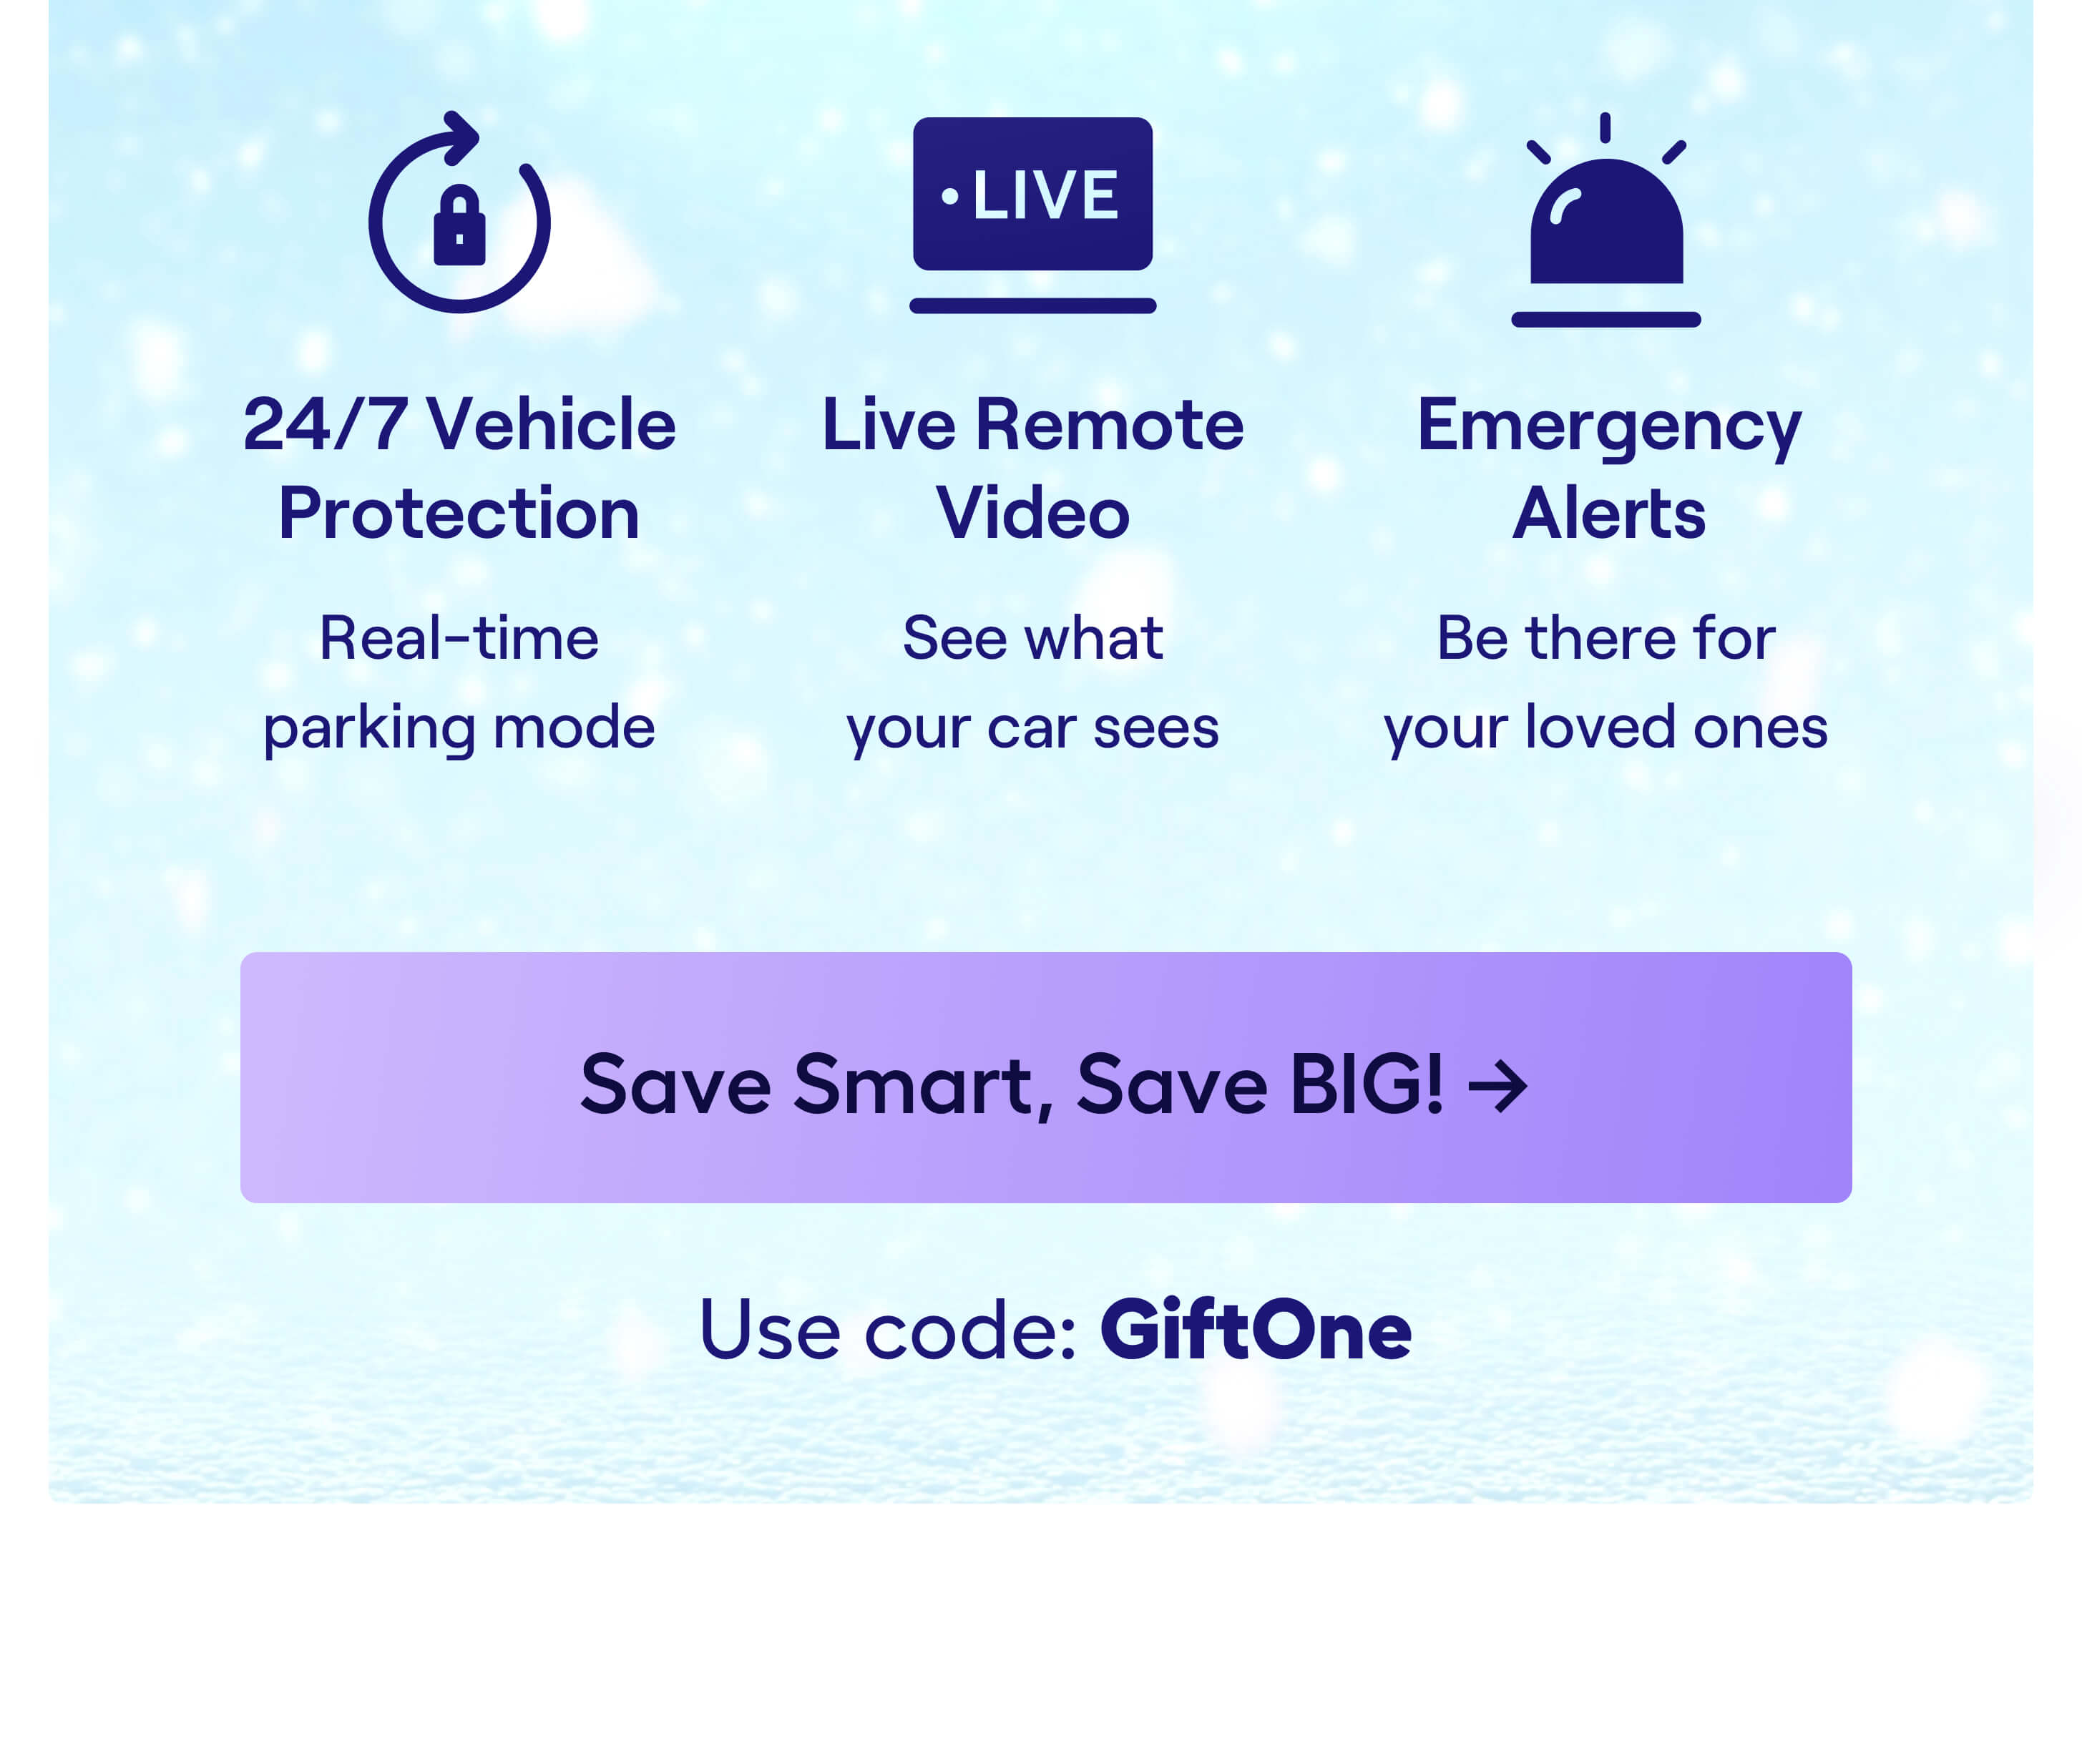 Save $110 OFF with code GIFTONE